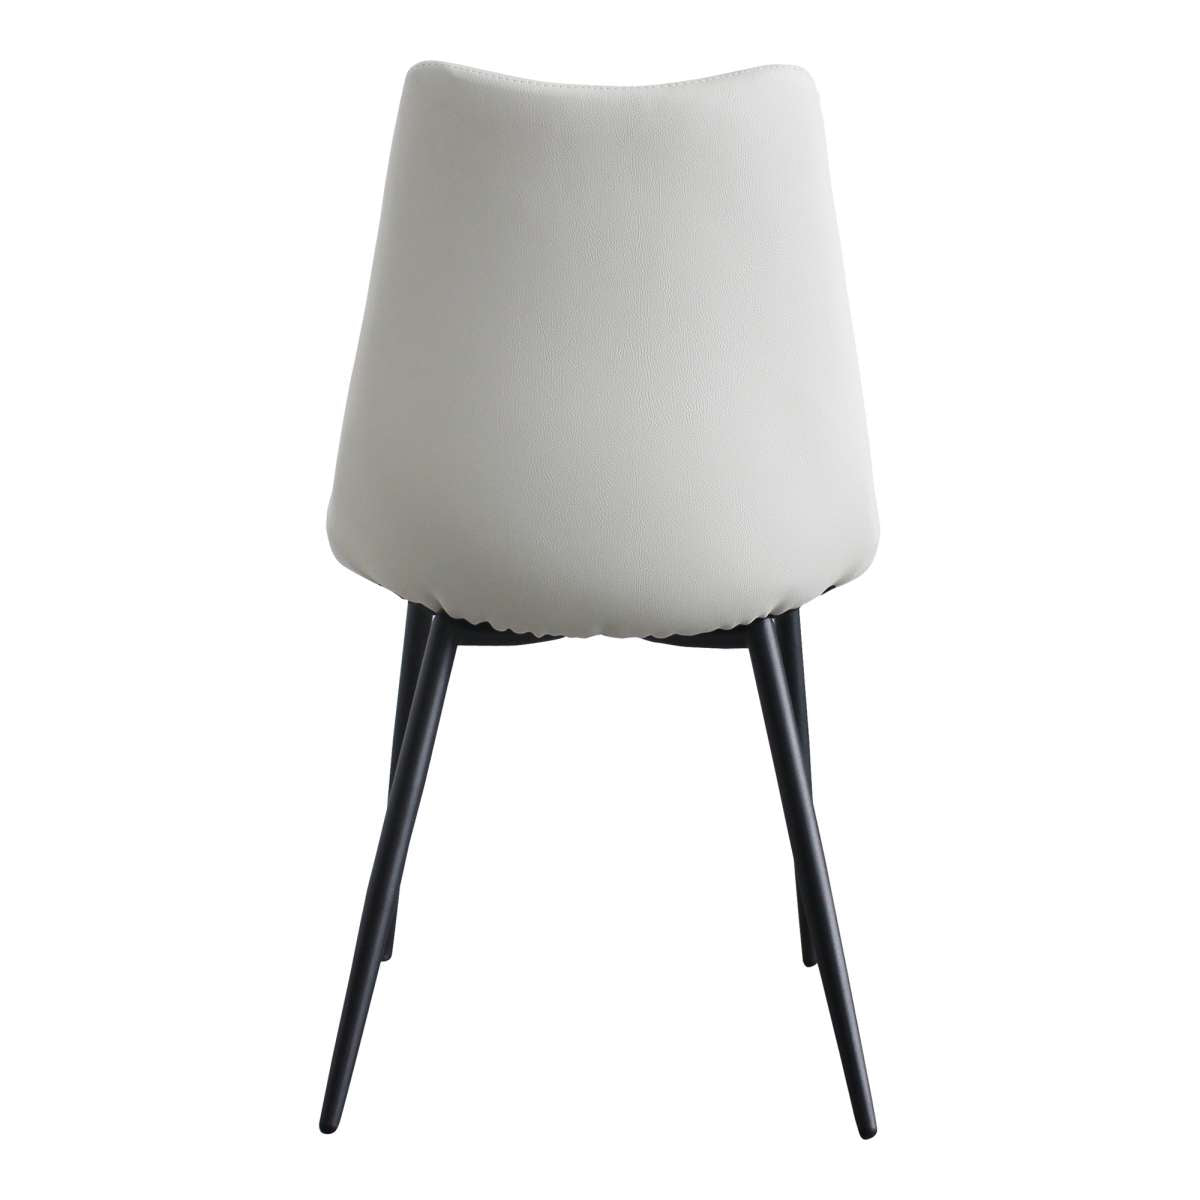 Alibi Dining Chair Matte Black-M2 By Moe's Home Collection